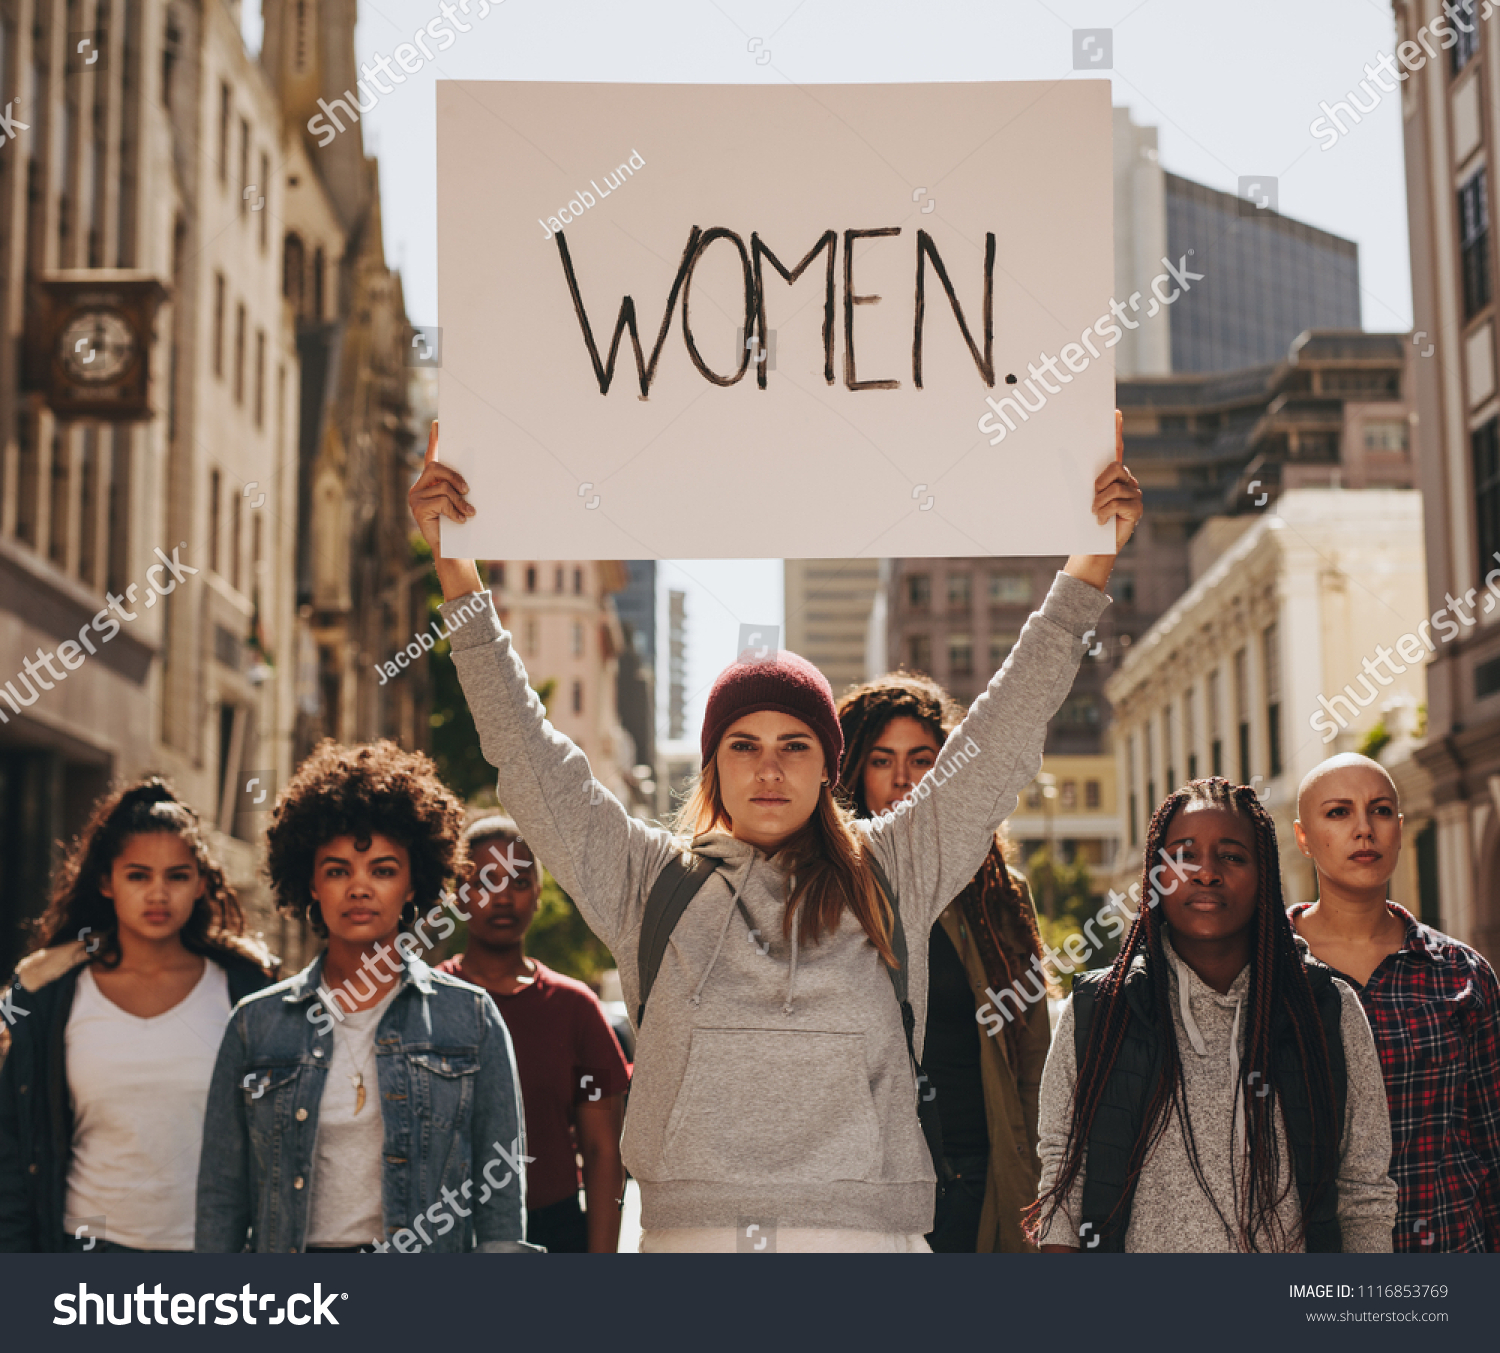 Group of females protesters marching on the road with signboard of women. Woman holding a protest sign about women empowerment with group of females around. #1116853769